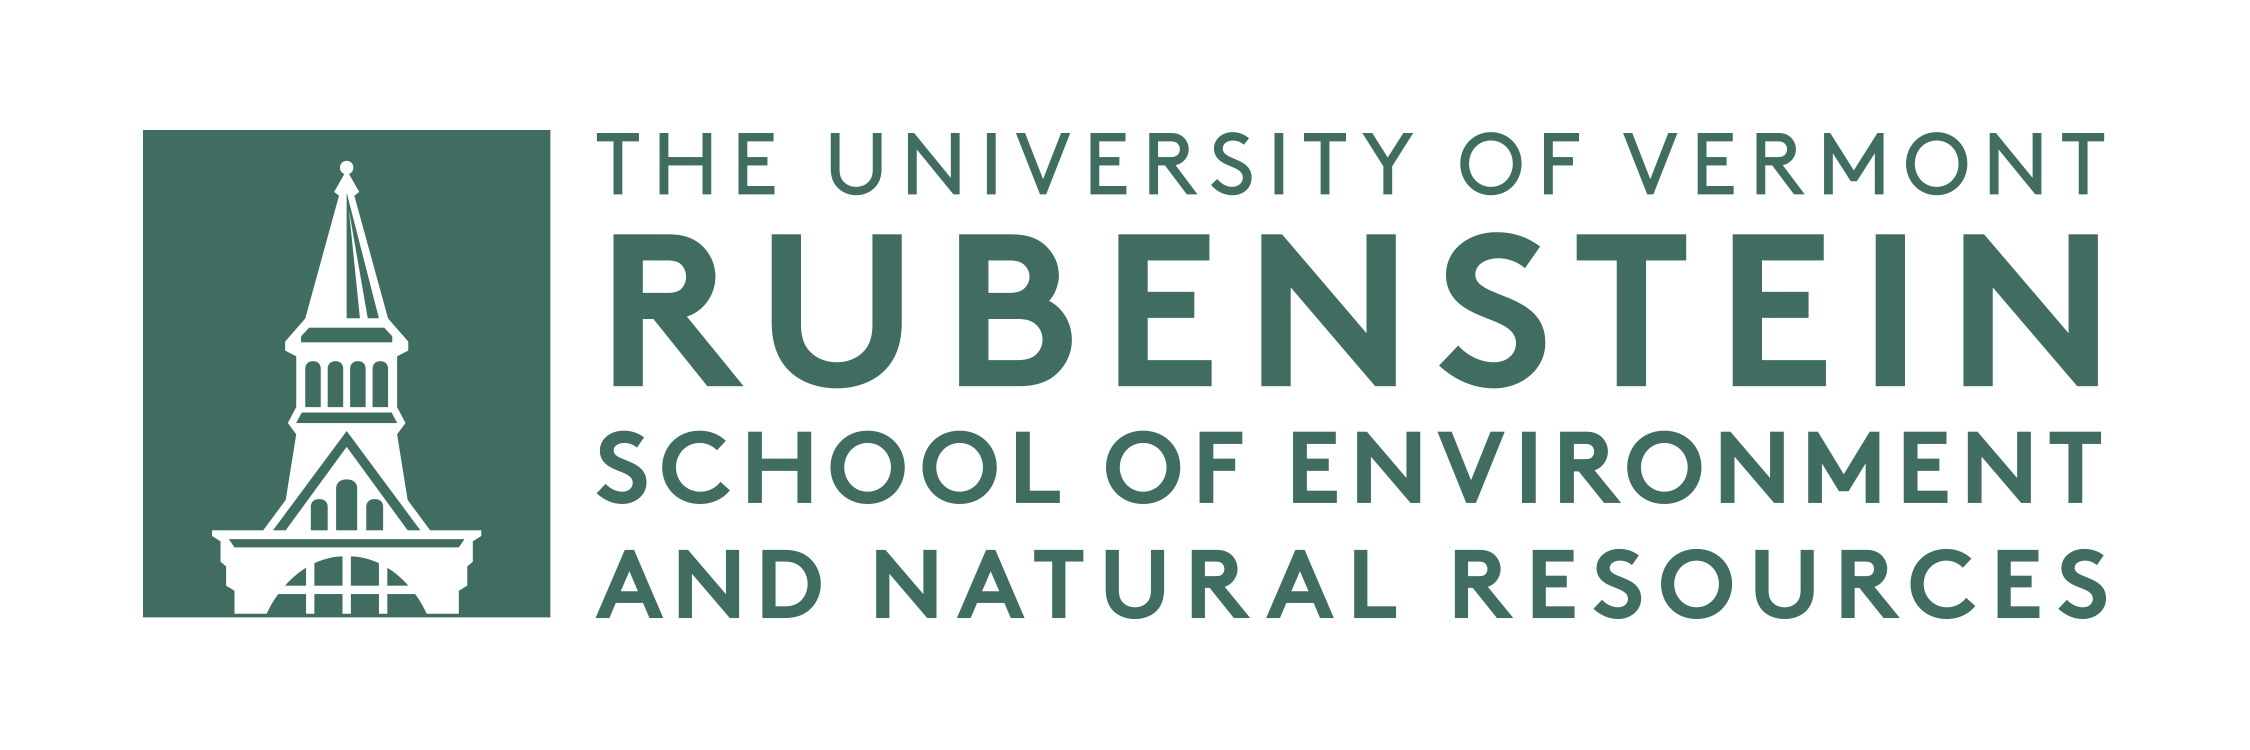 Rubenstein School of Environment and Natural Resources logo